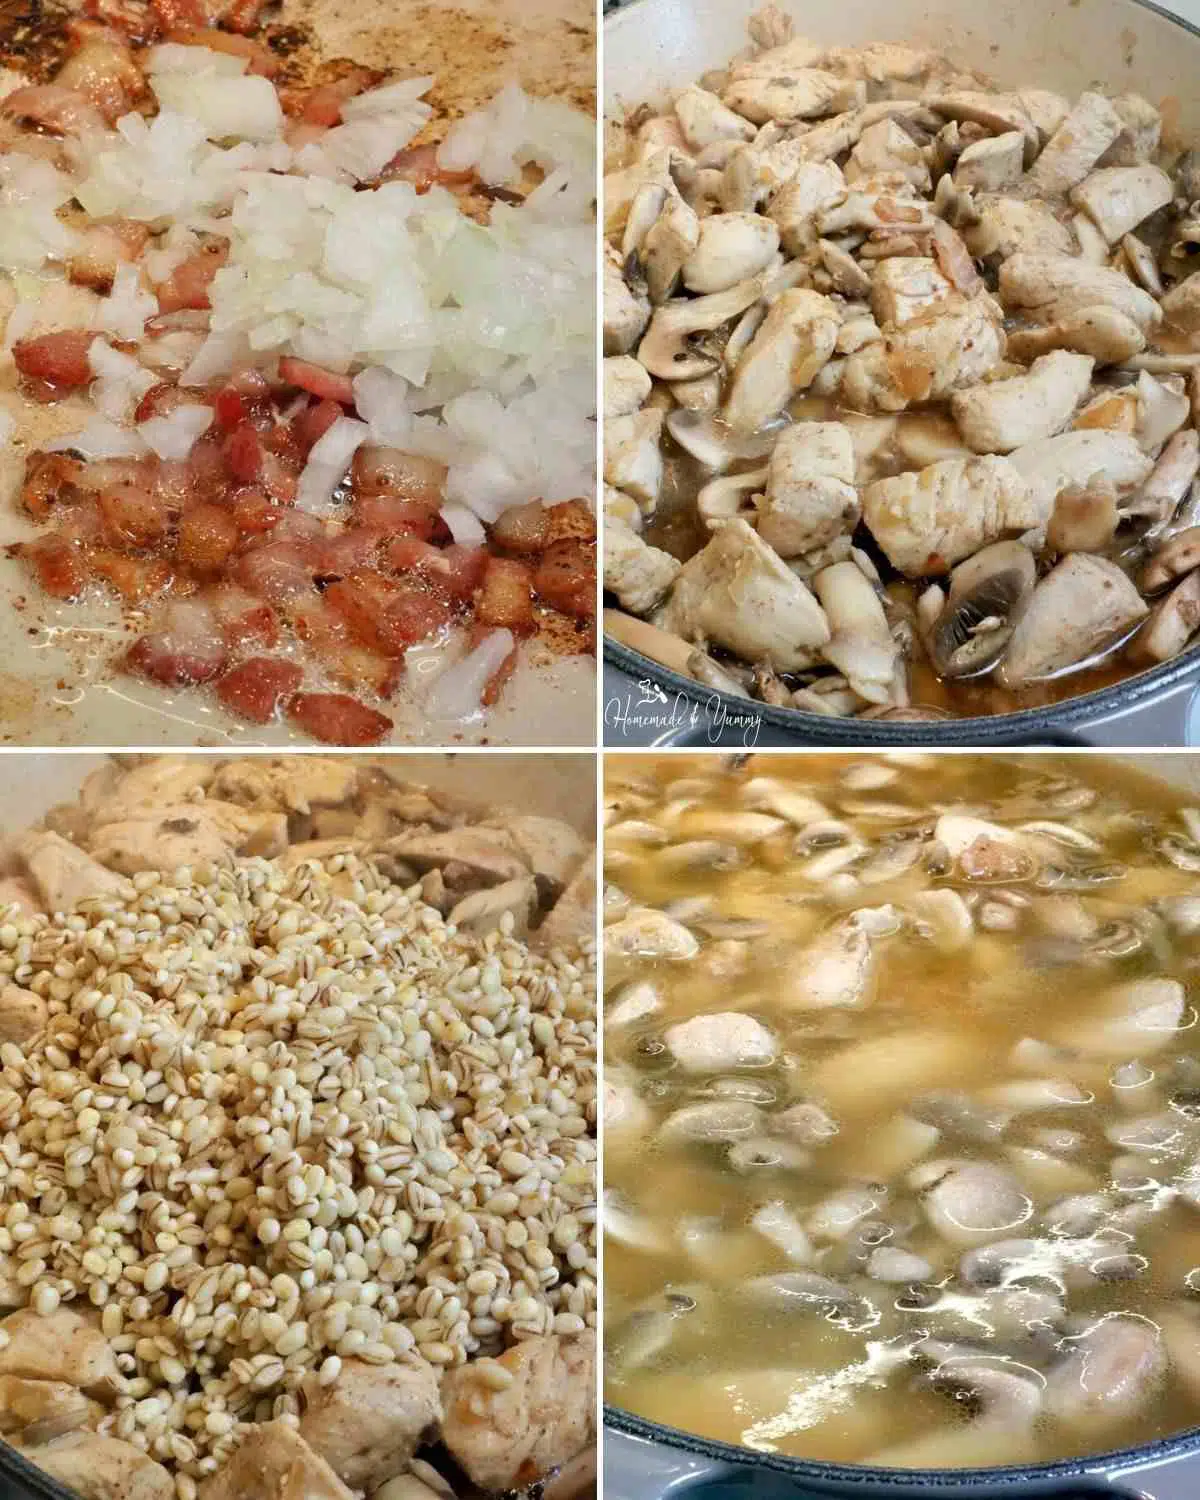 Steps involved in preparing the casserole before putting it in the oven.